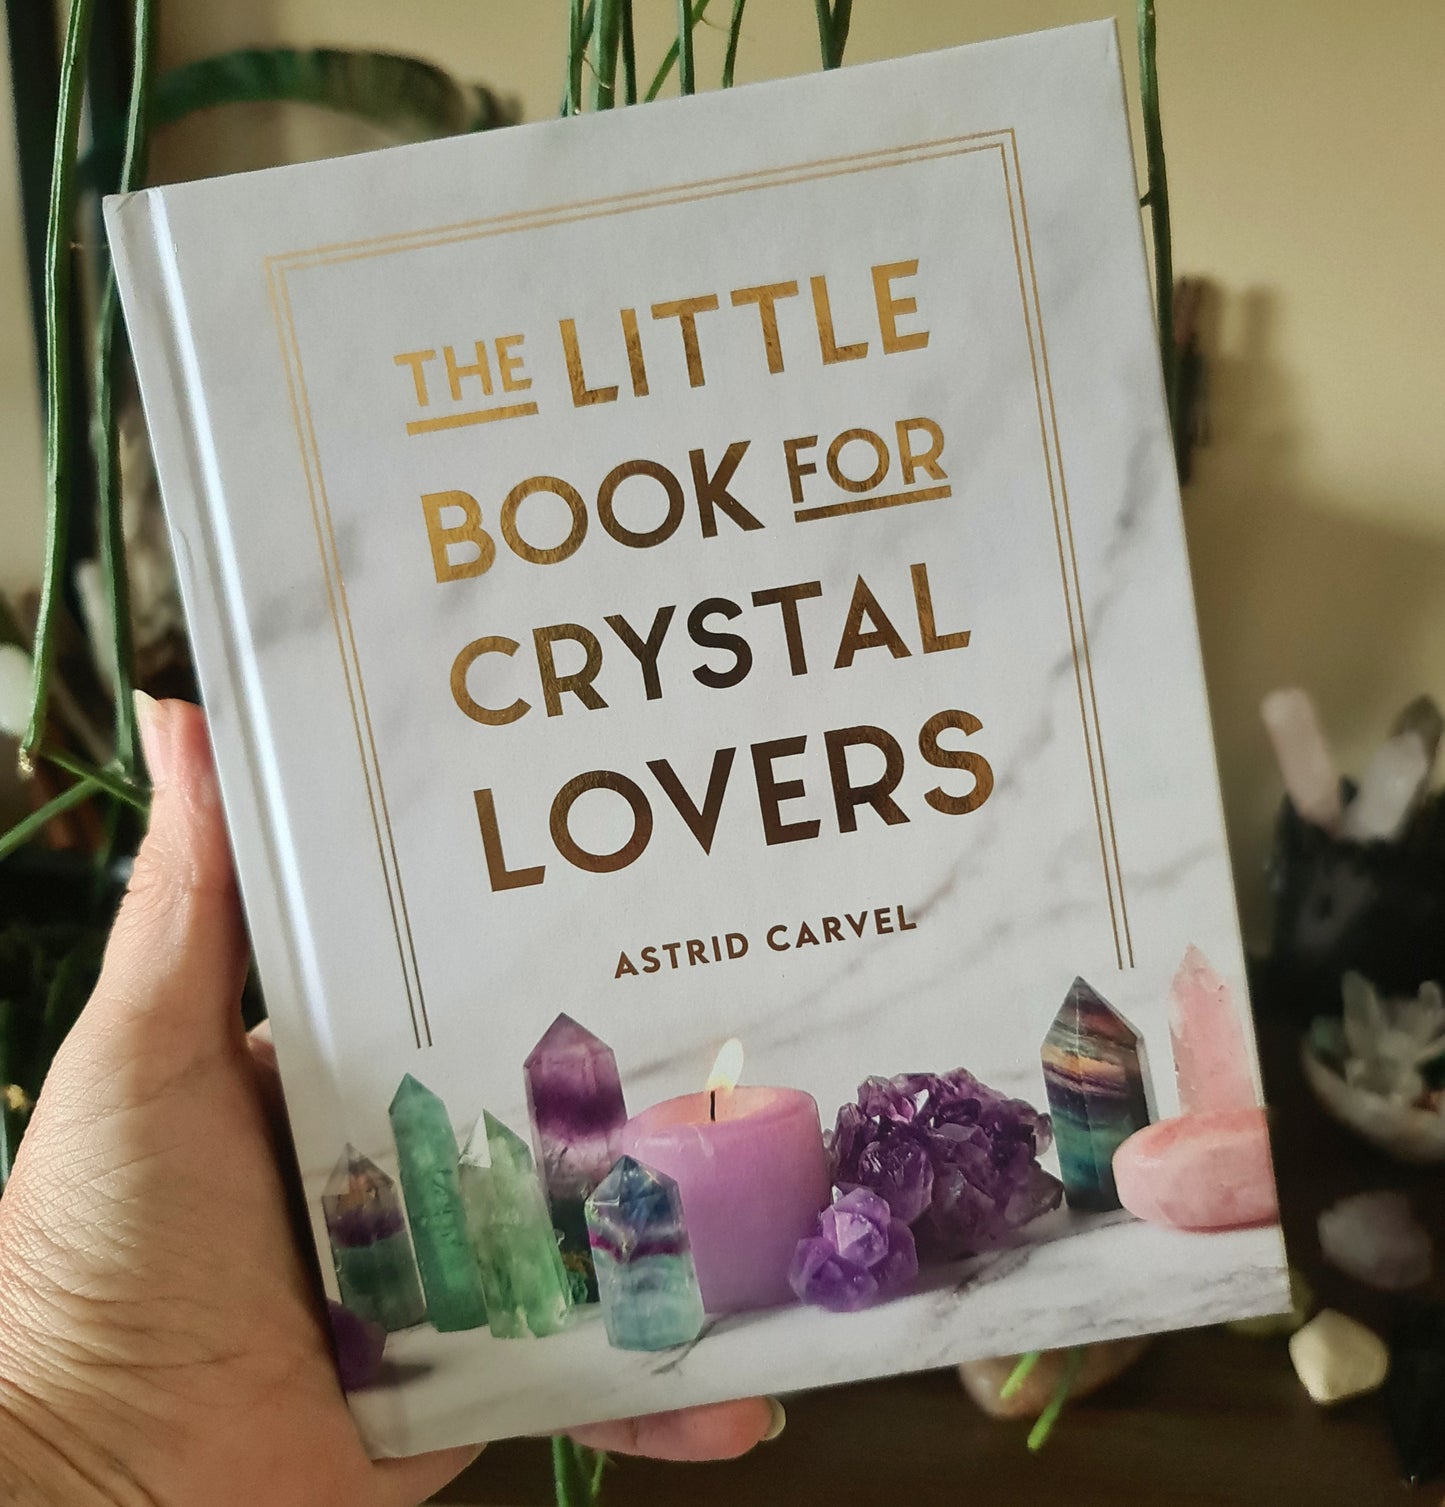 The Little Book For Crystal Lovers